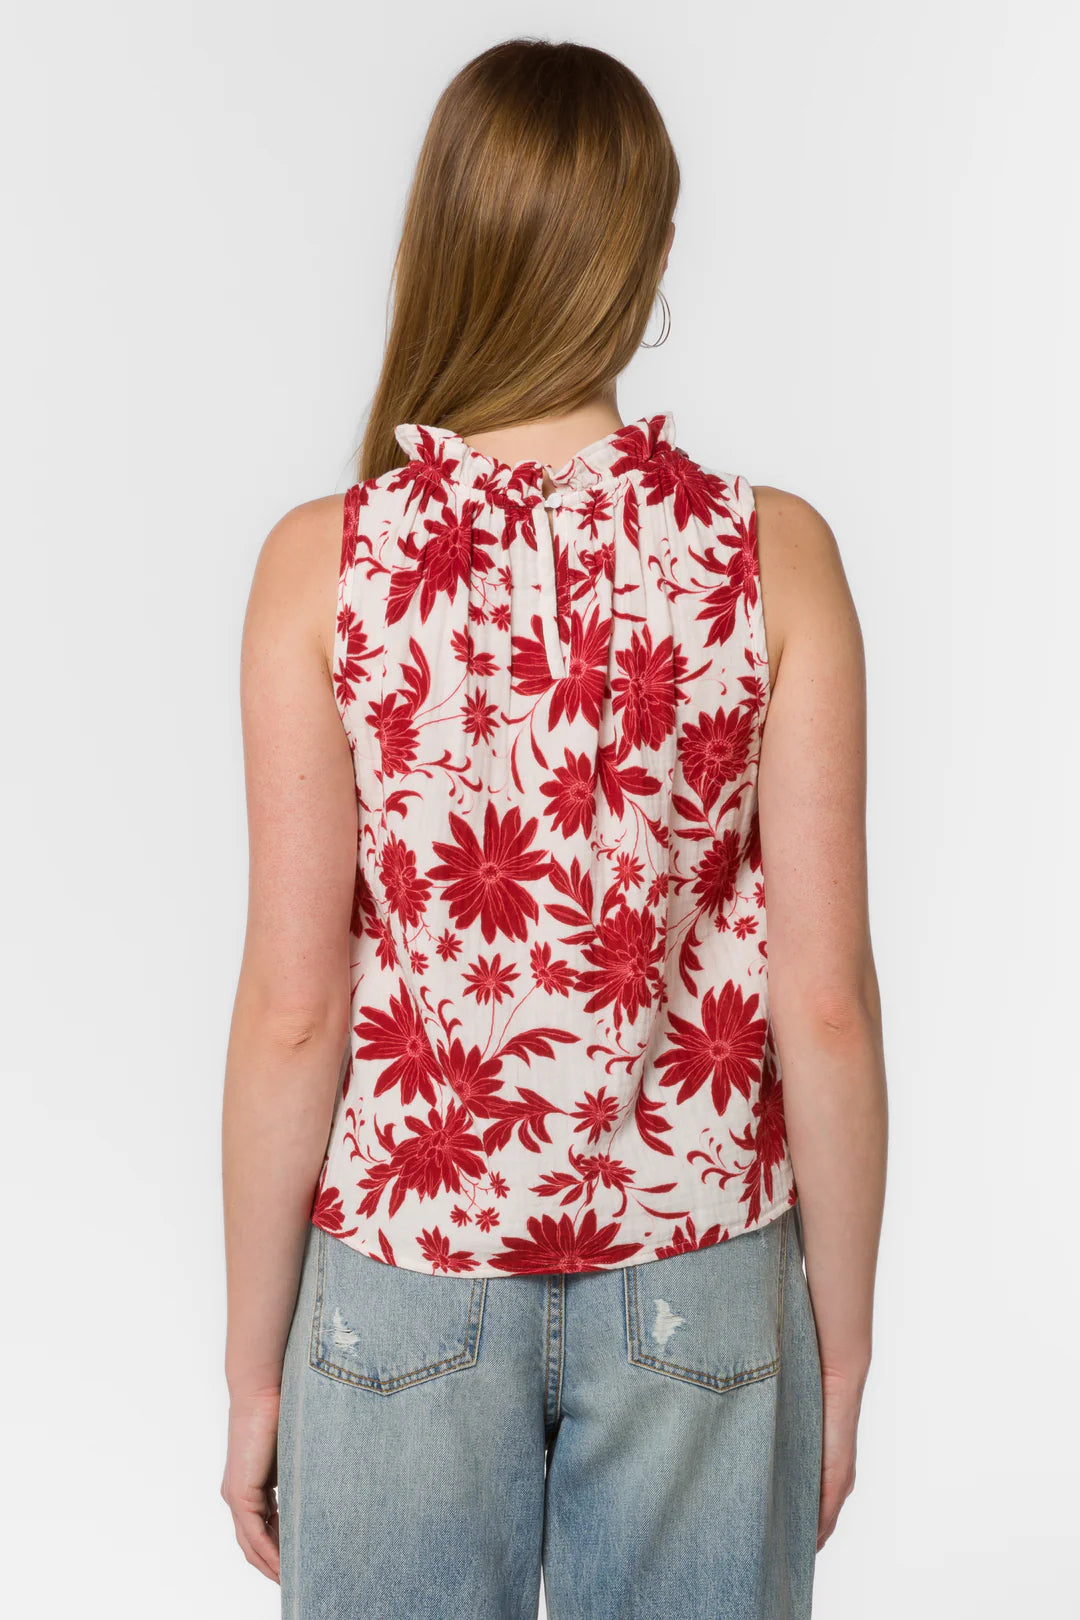 The Valerie Floral Top